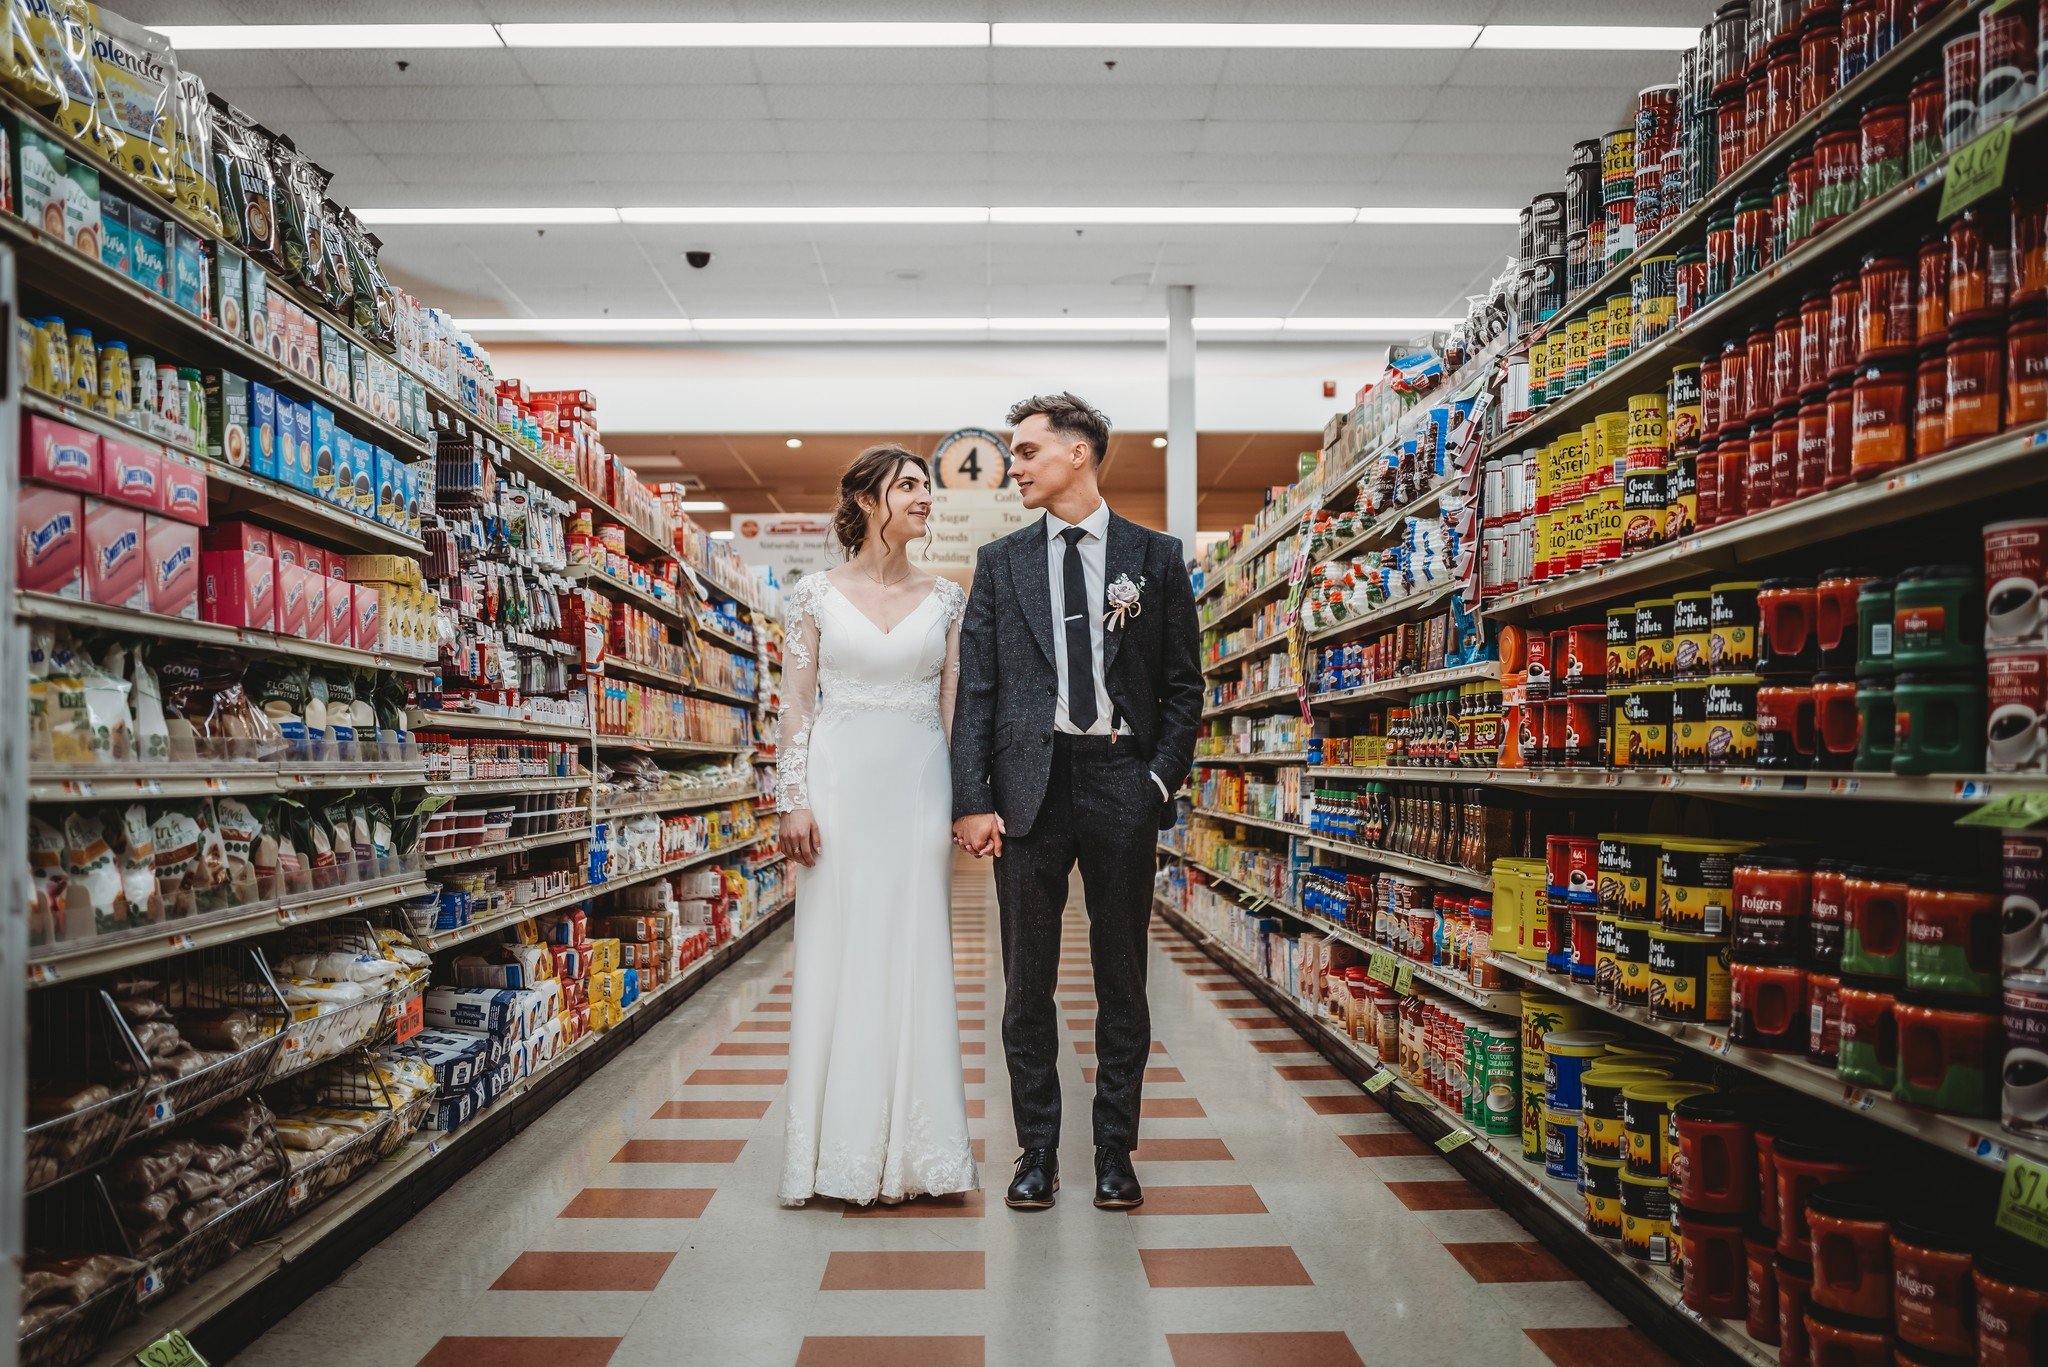 stopping by the local Market Basket after your wedding for breakfast items was a new one for me.

Congrats Olivia &amp; Michael and I hope breakfast was delicious.

#livethelittlethings #lookslikefilm #loveauthentic #mainewedding #maineweddingphotogr